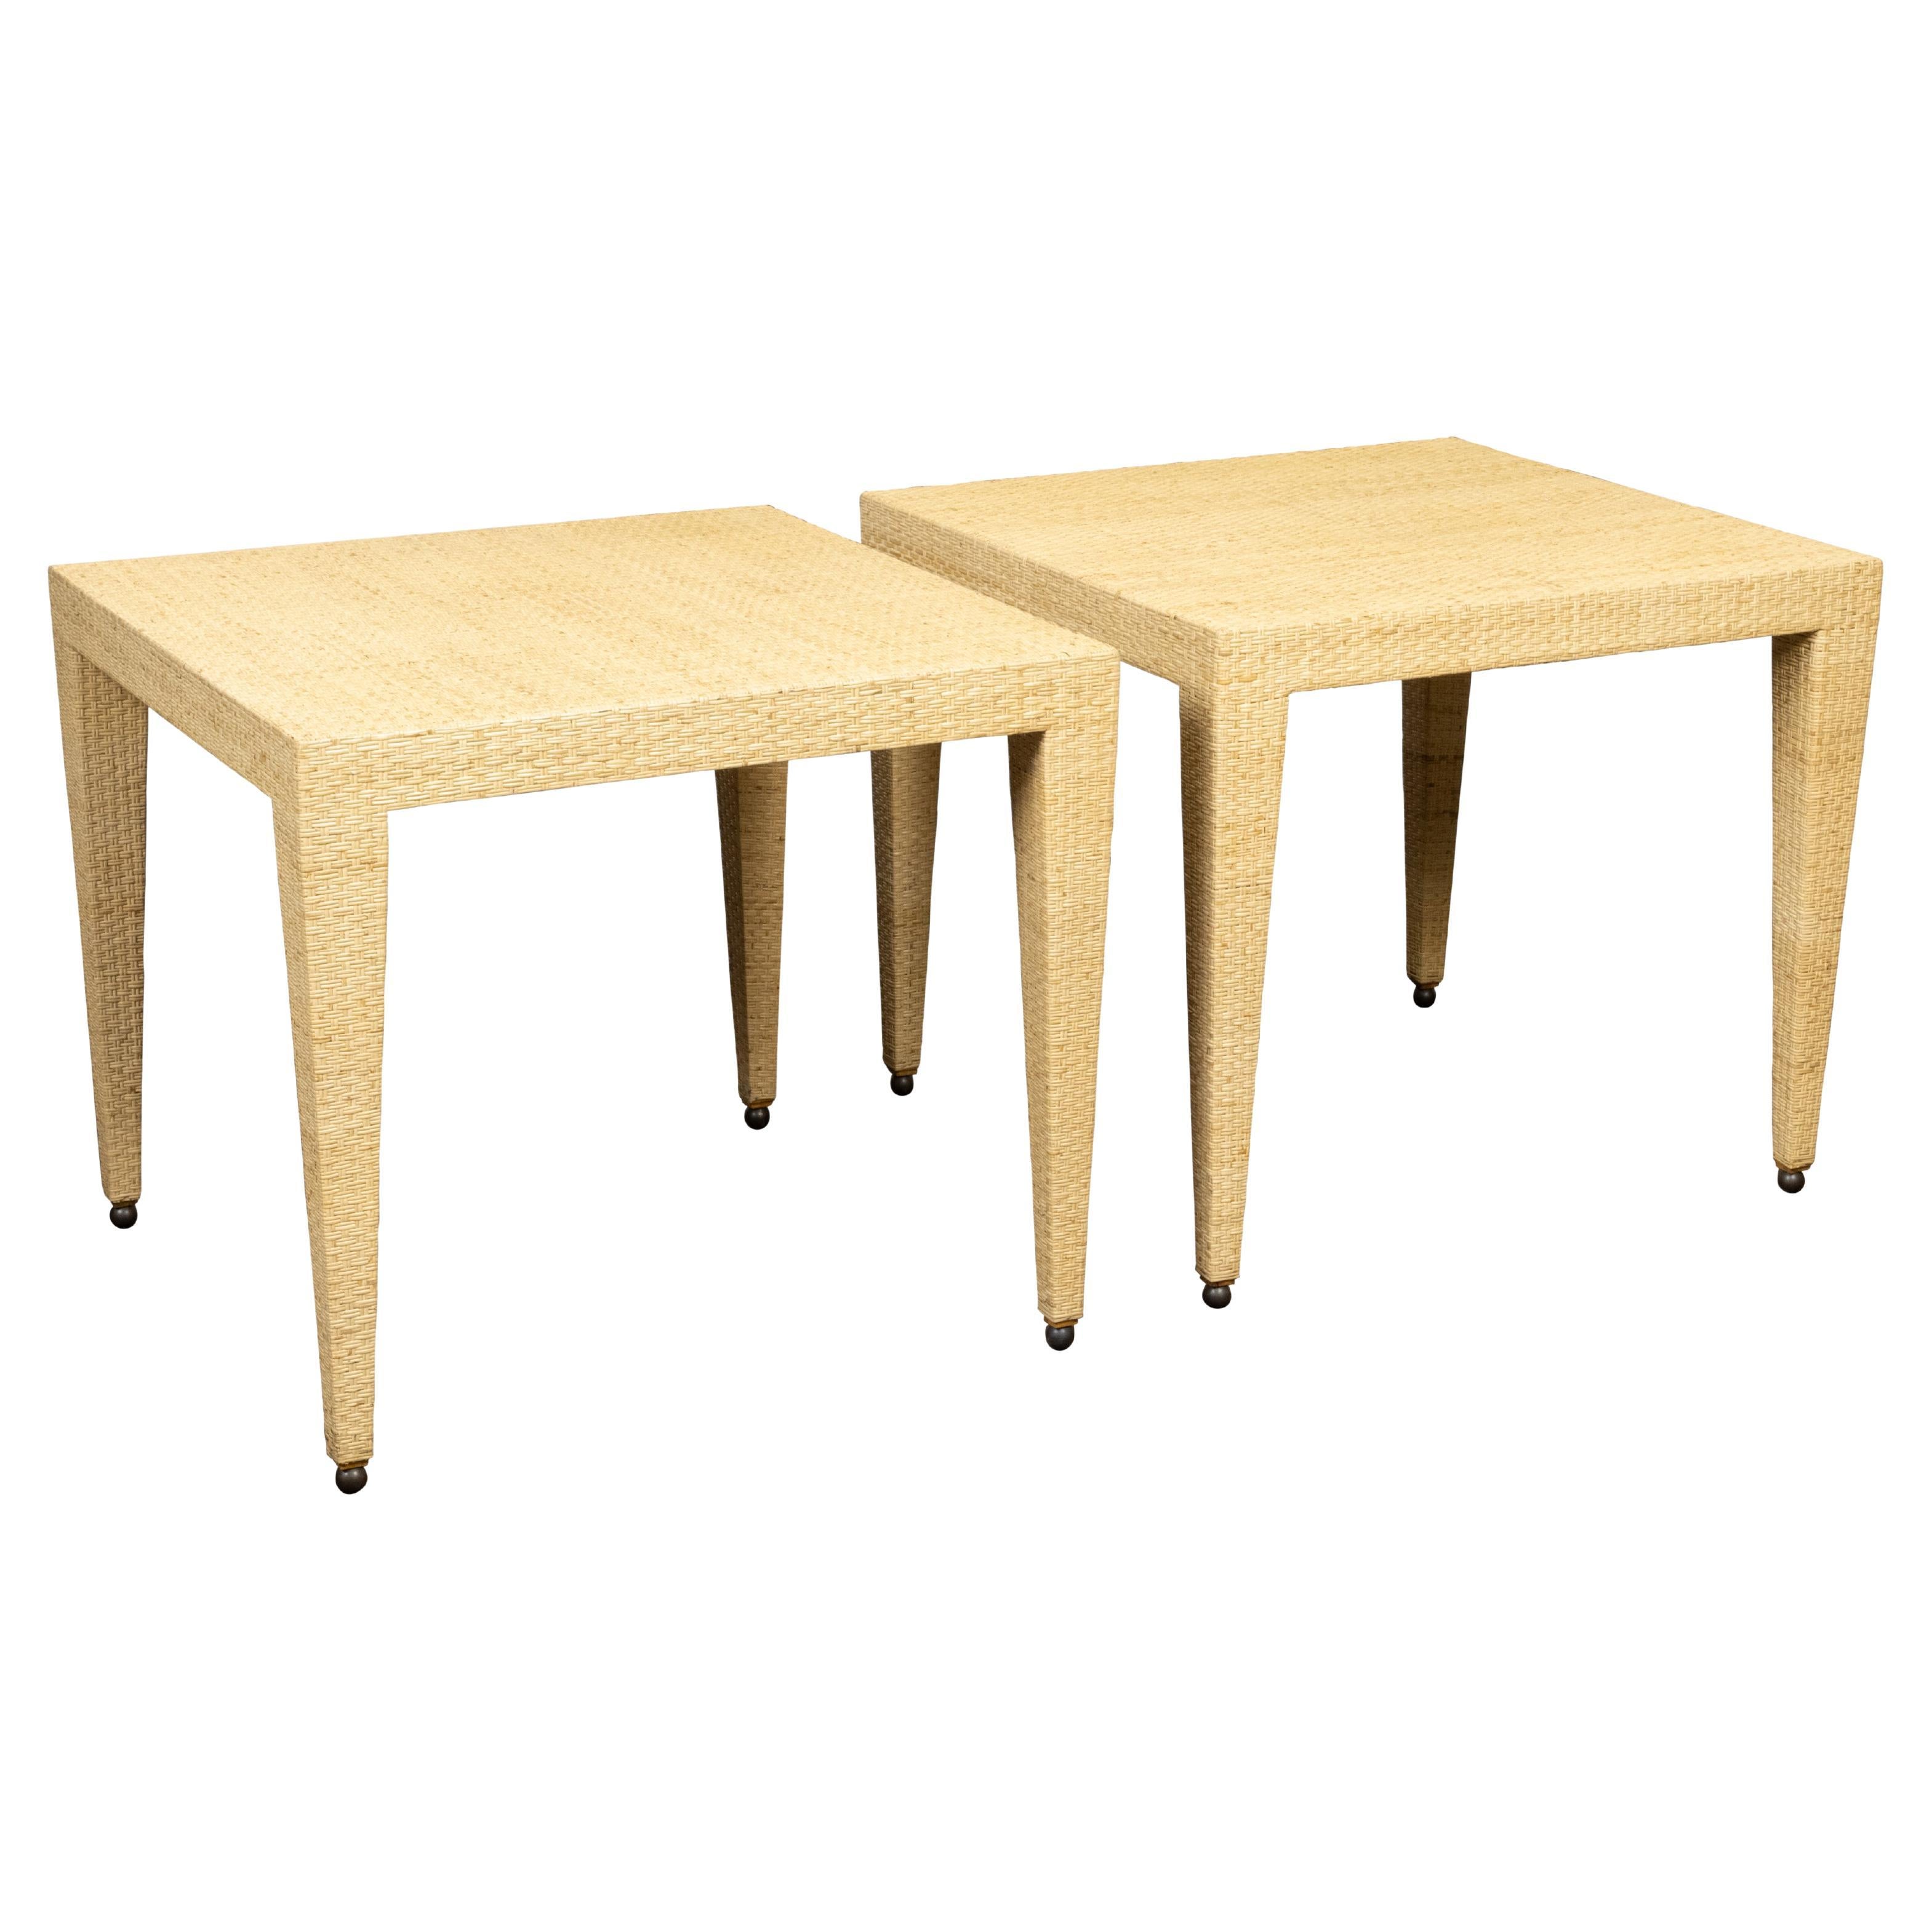 Pair of Baker Furniture Midcentury Wicker Side Tables with Tapered Legs For Sale